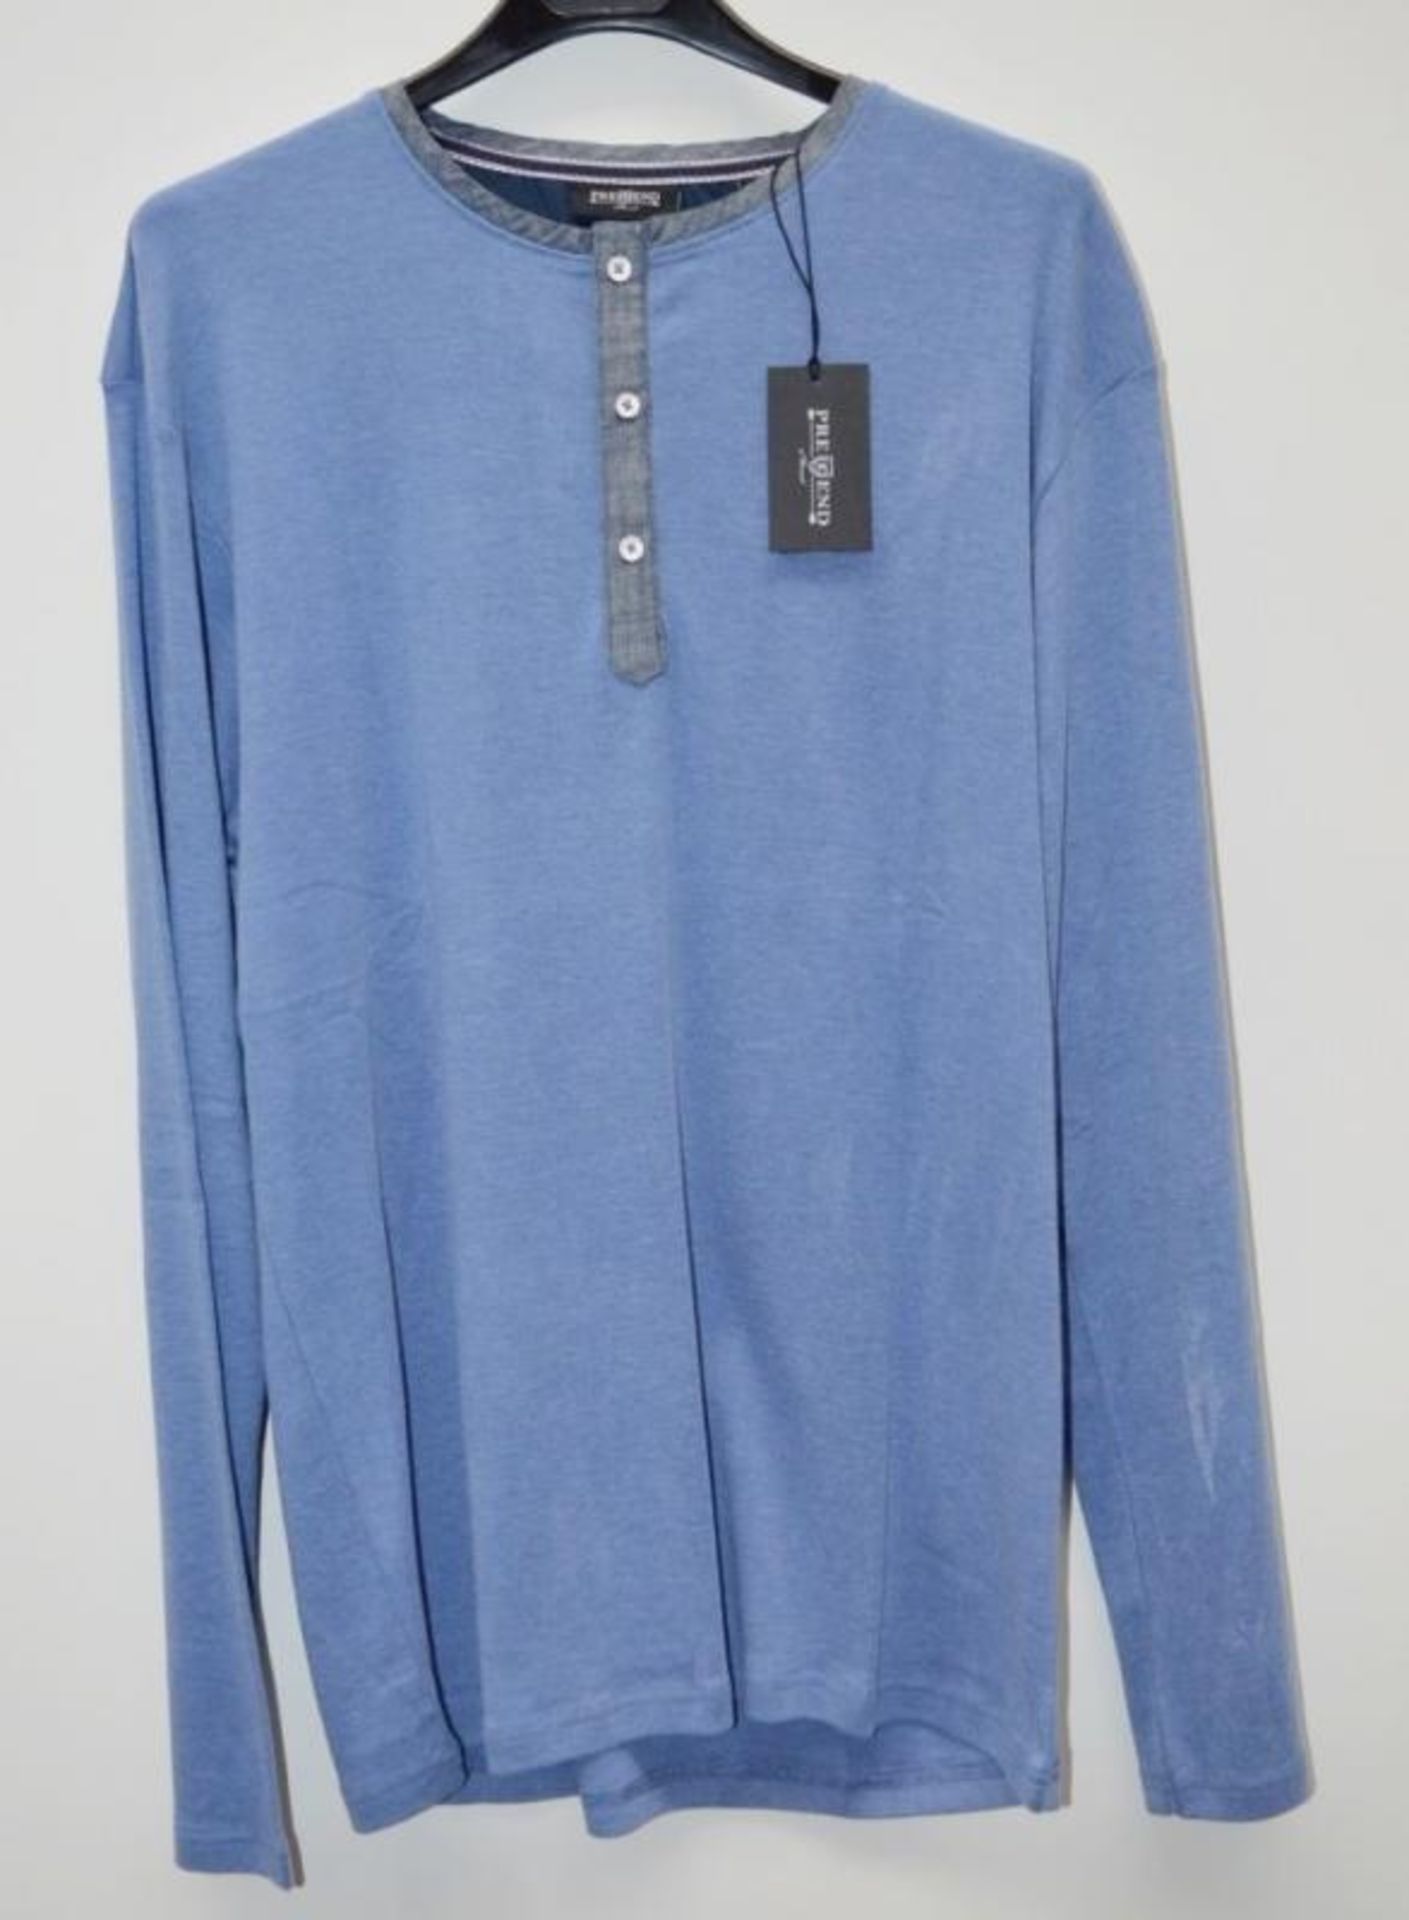 5 x Assorted PRE END Branded Mens Long Sleeve Tops - New Stock With Tags - Recent Retail Closure - - Image 7 of 8